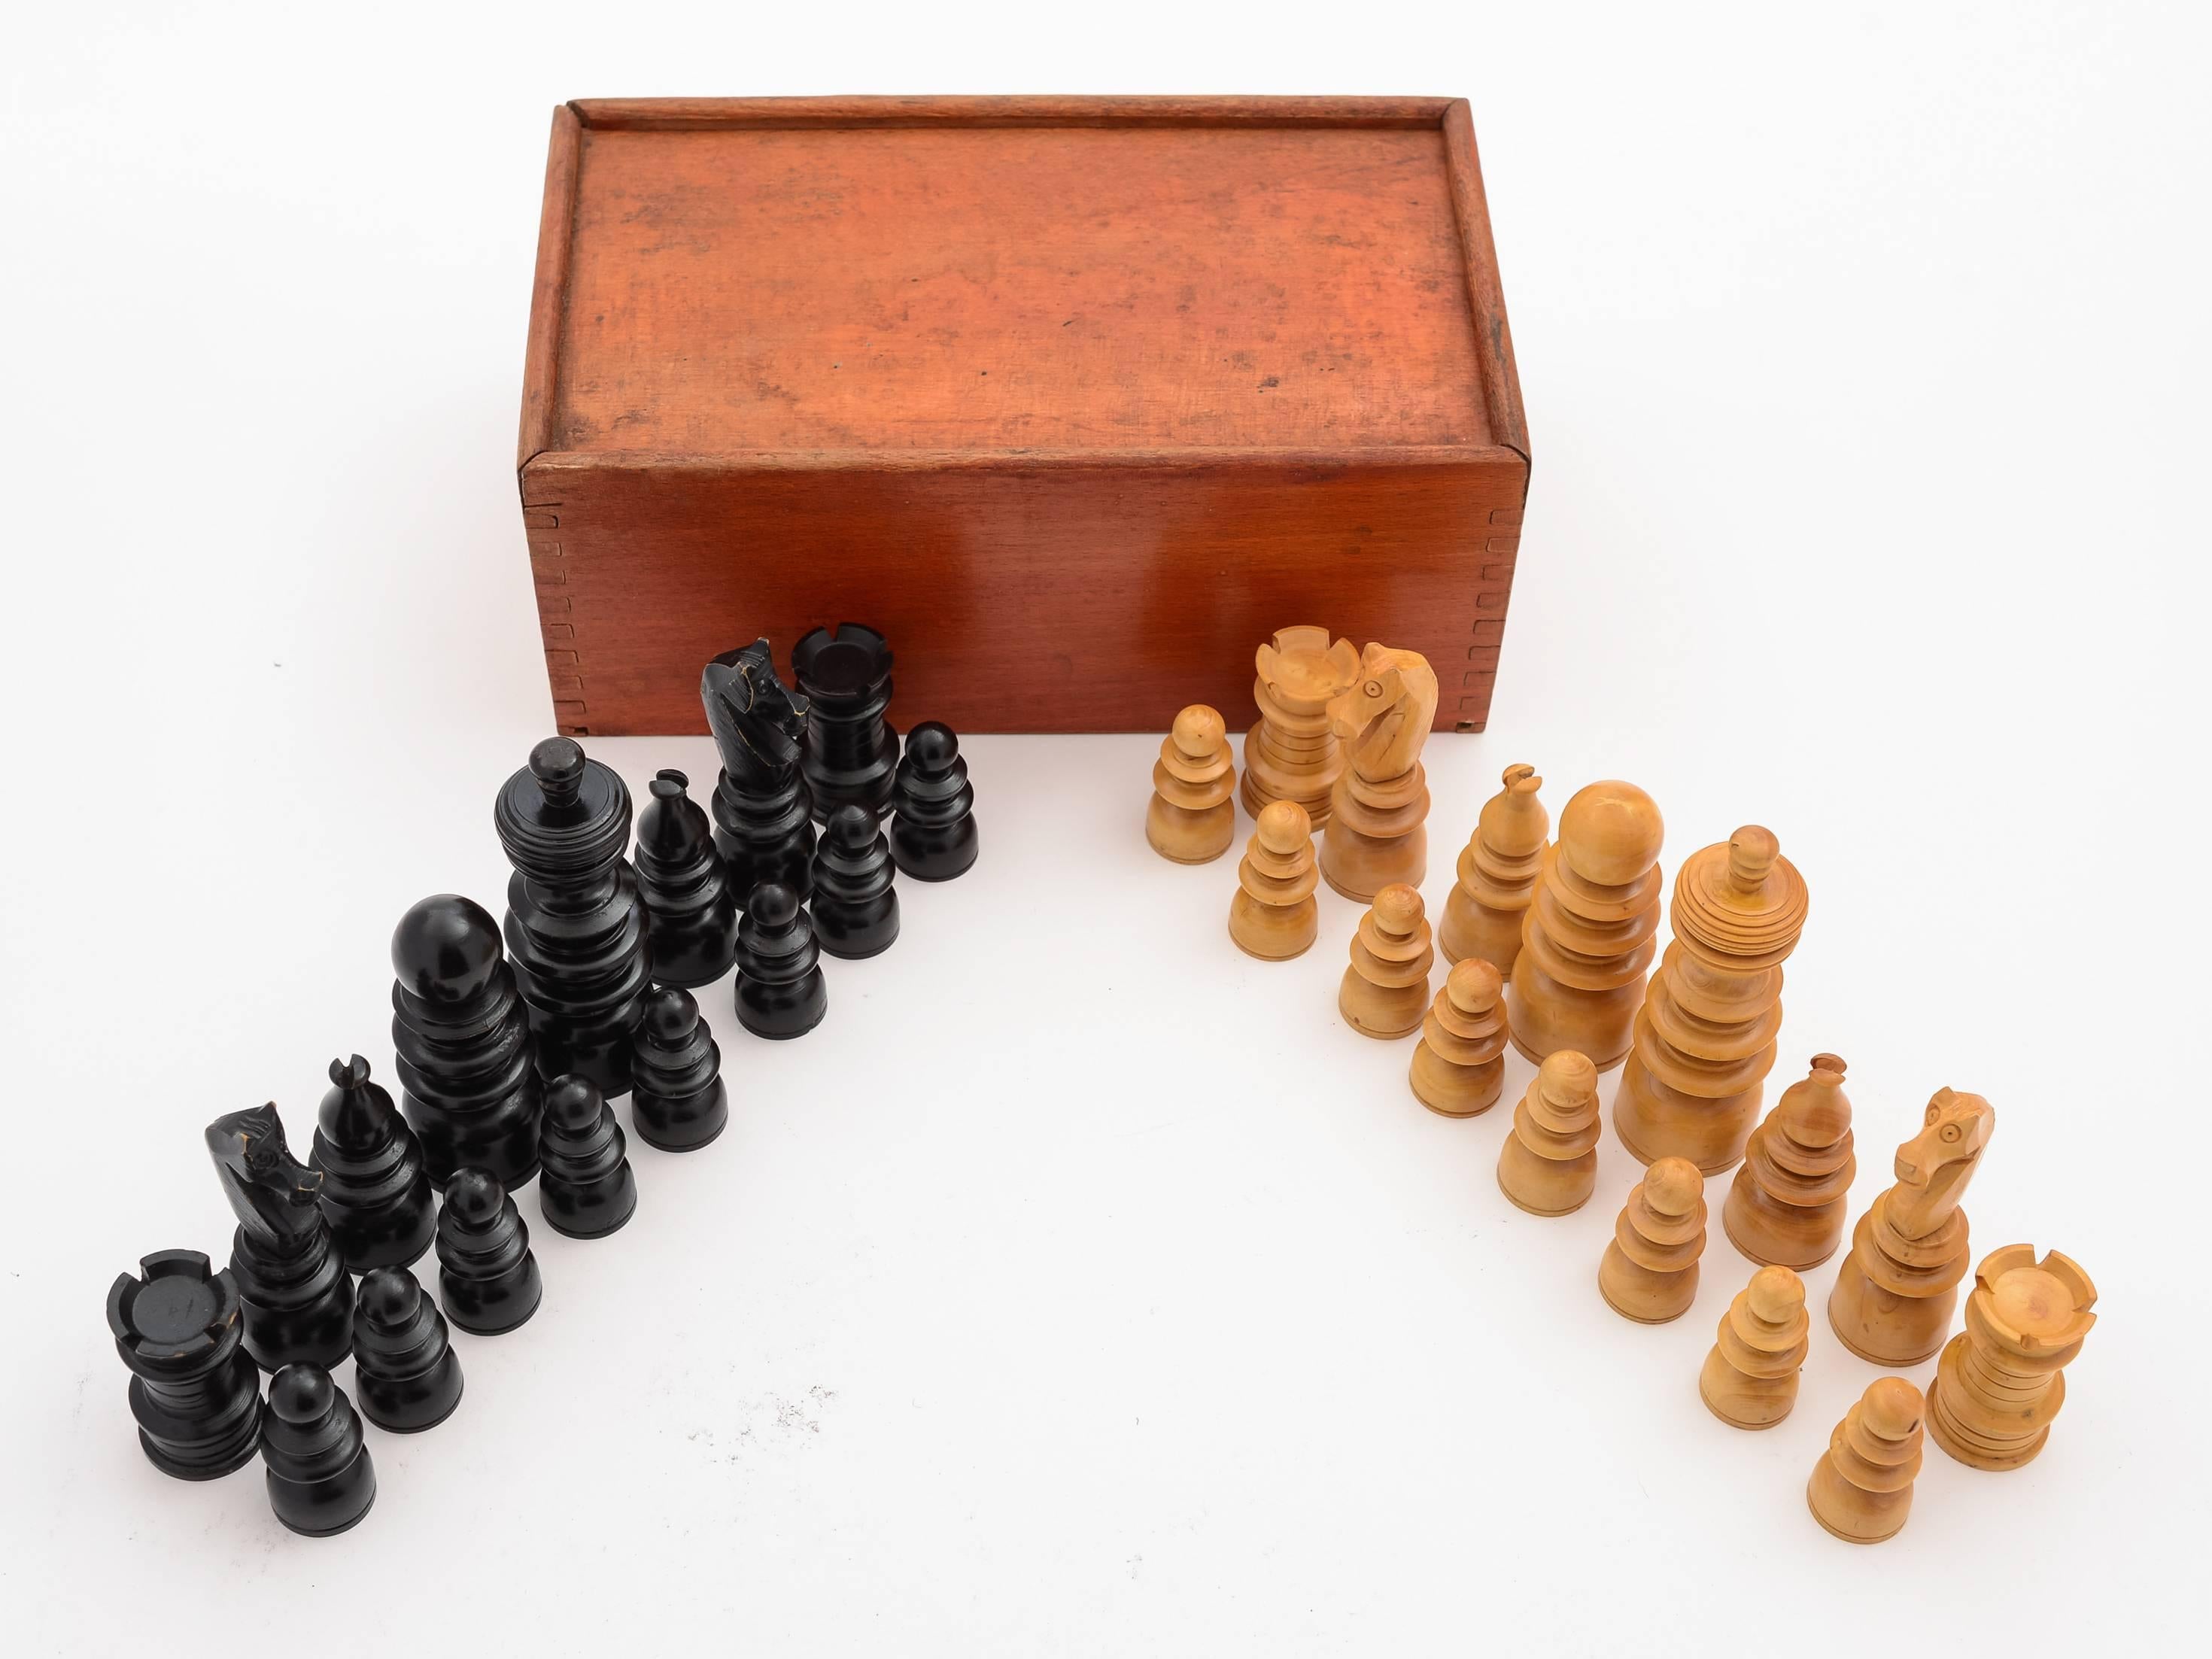 A lovely cased boxwood chess set in the Regency style, presented in their original felt lined and stained pine box, circa 1920.

Worldwide, first class, tracked and signed for delivery is included in the price.

Measurements:
King height: 3